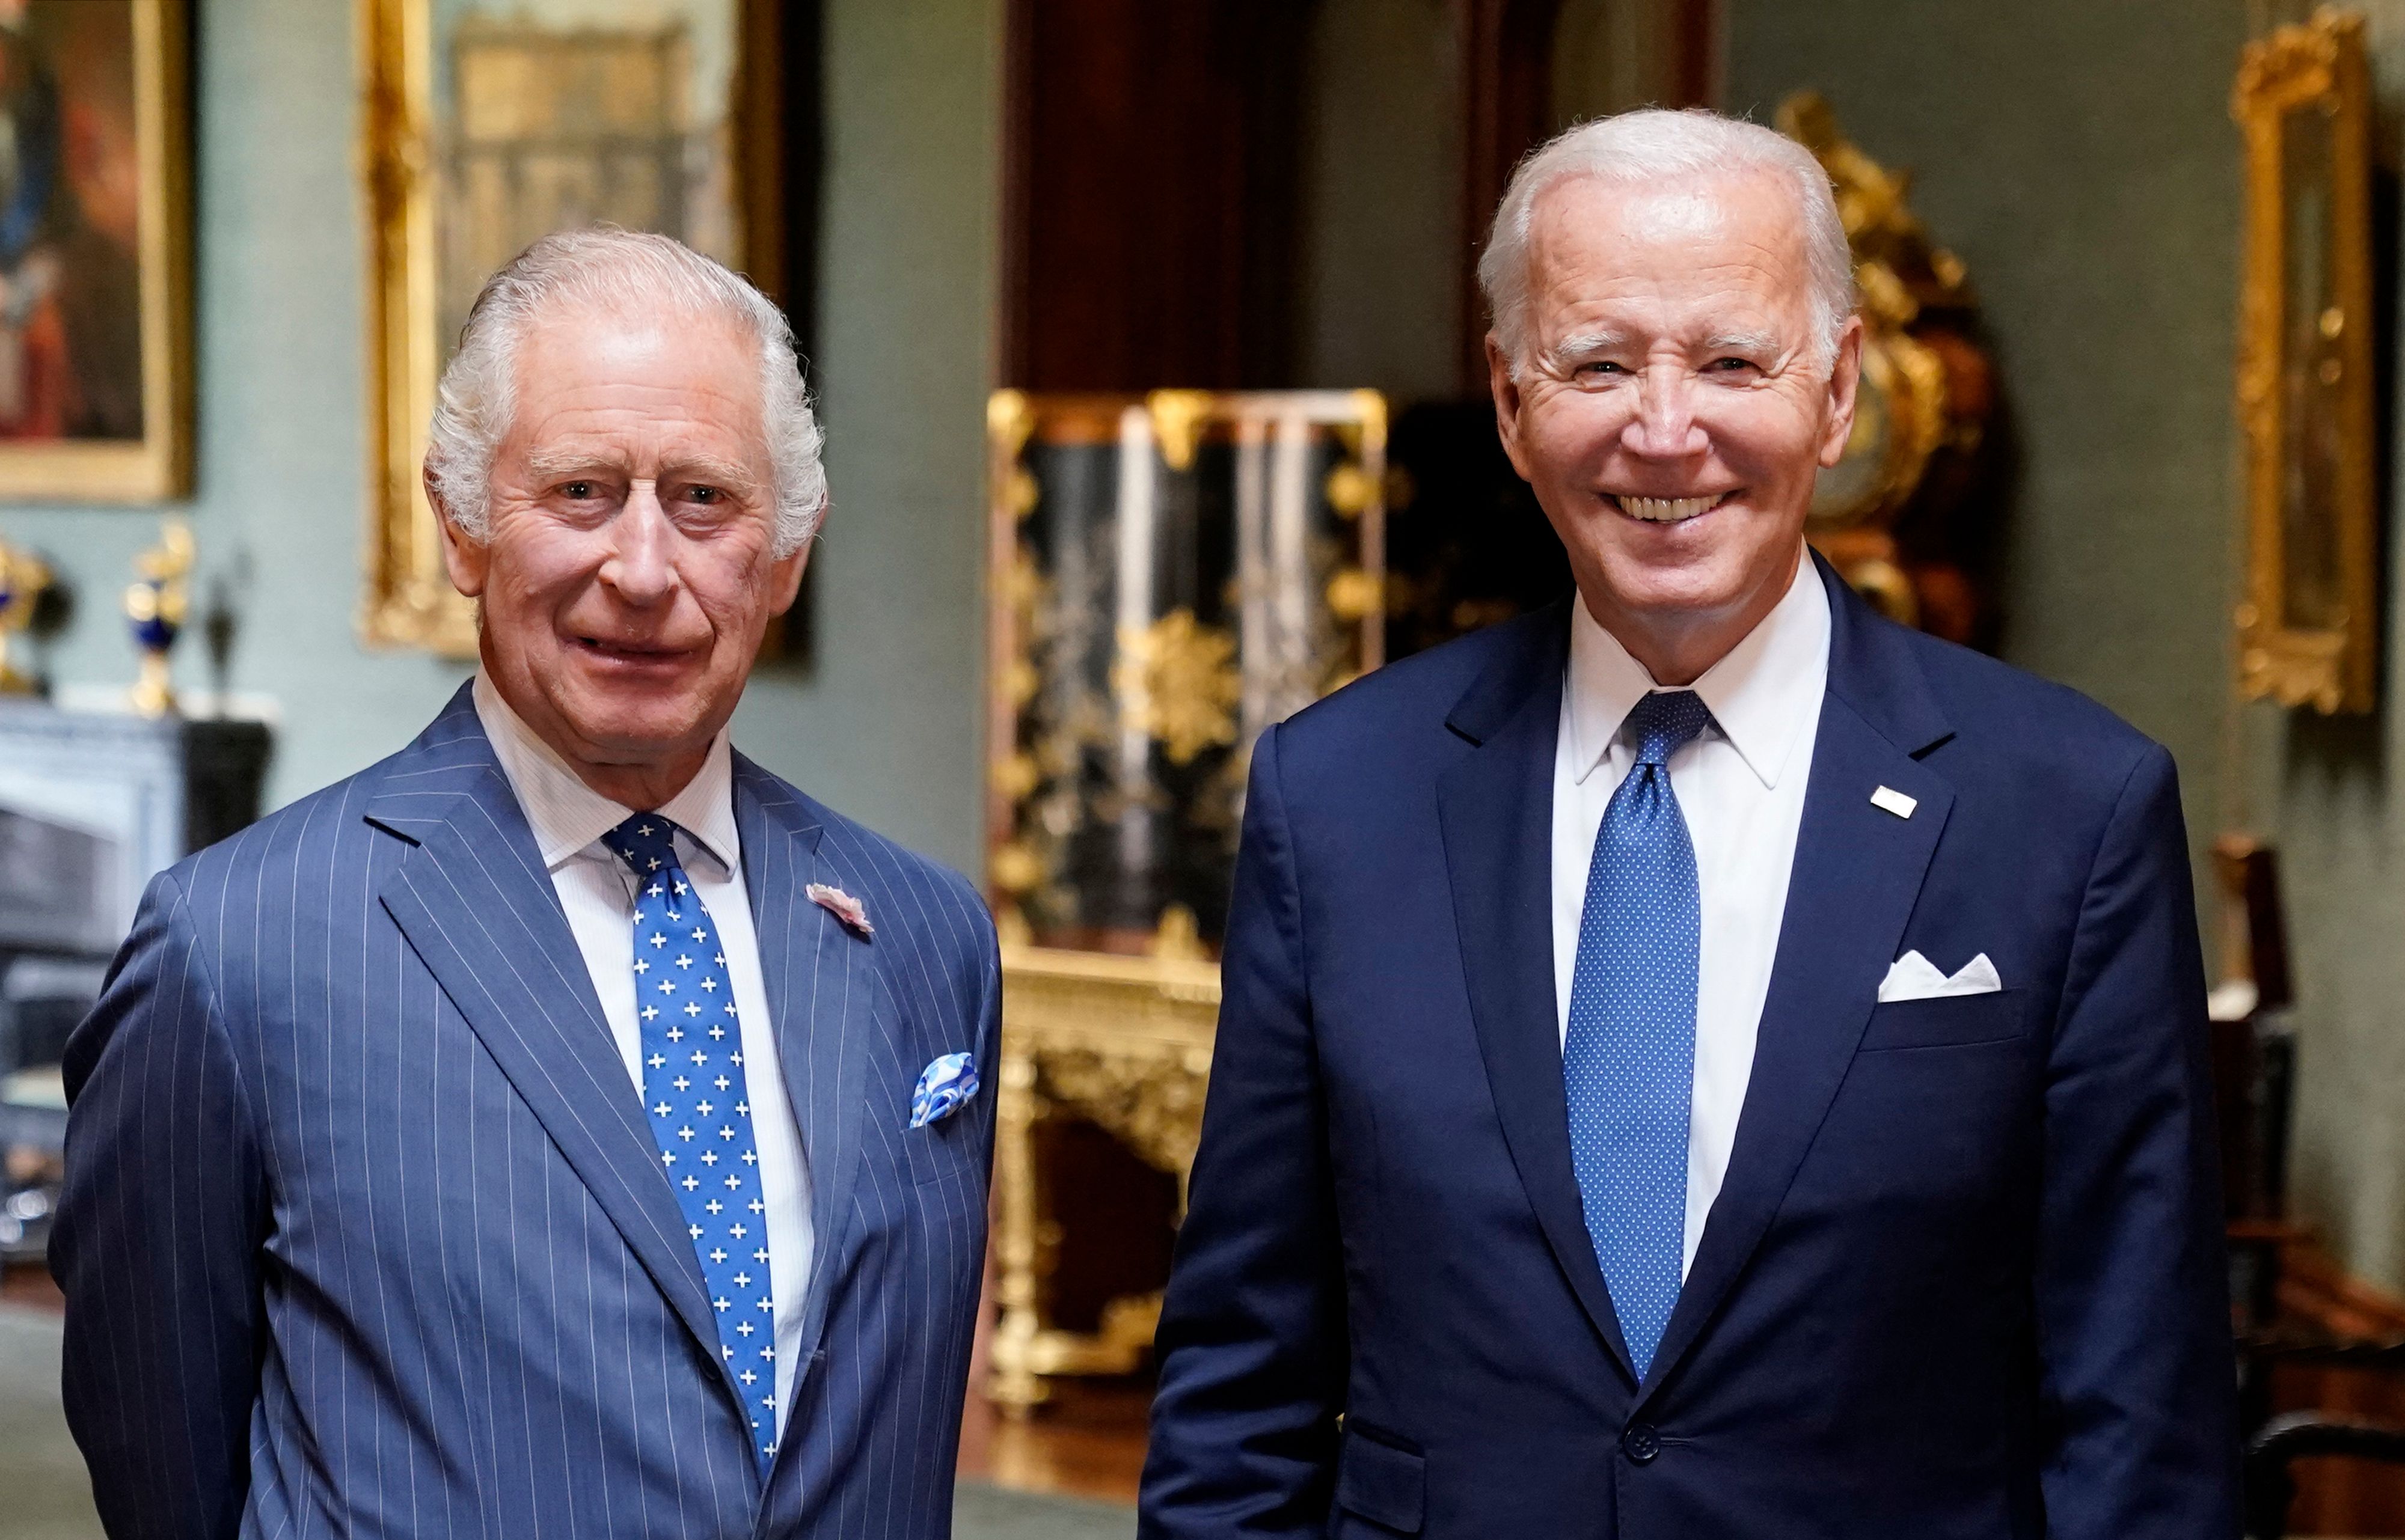 <p>King Charles III and President Joe Biden posed together in the Grand Corridor inside Windsor Castle in Windsor, England, on July 10, 2023. <a href="https://www.wonderwall.com/celebrity/royals/see-king-charles-iii-meetings-with-american-u-s-presidents-over-the-years-prince-charles-camilla-652116.gallery">The president visited Britain</a> to further strengthen the close relationship between the nations and to discuss climate issues with the monarch.</p>